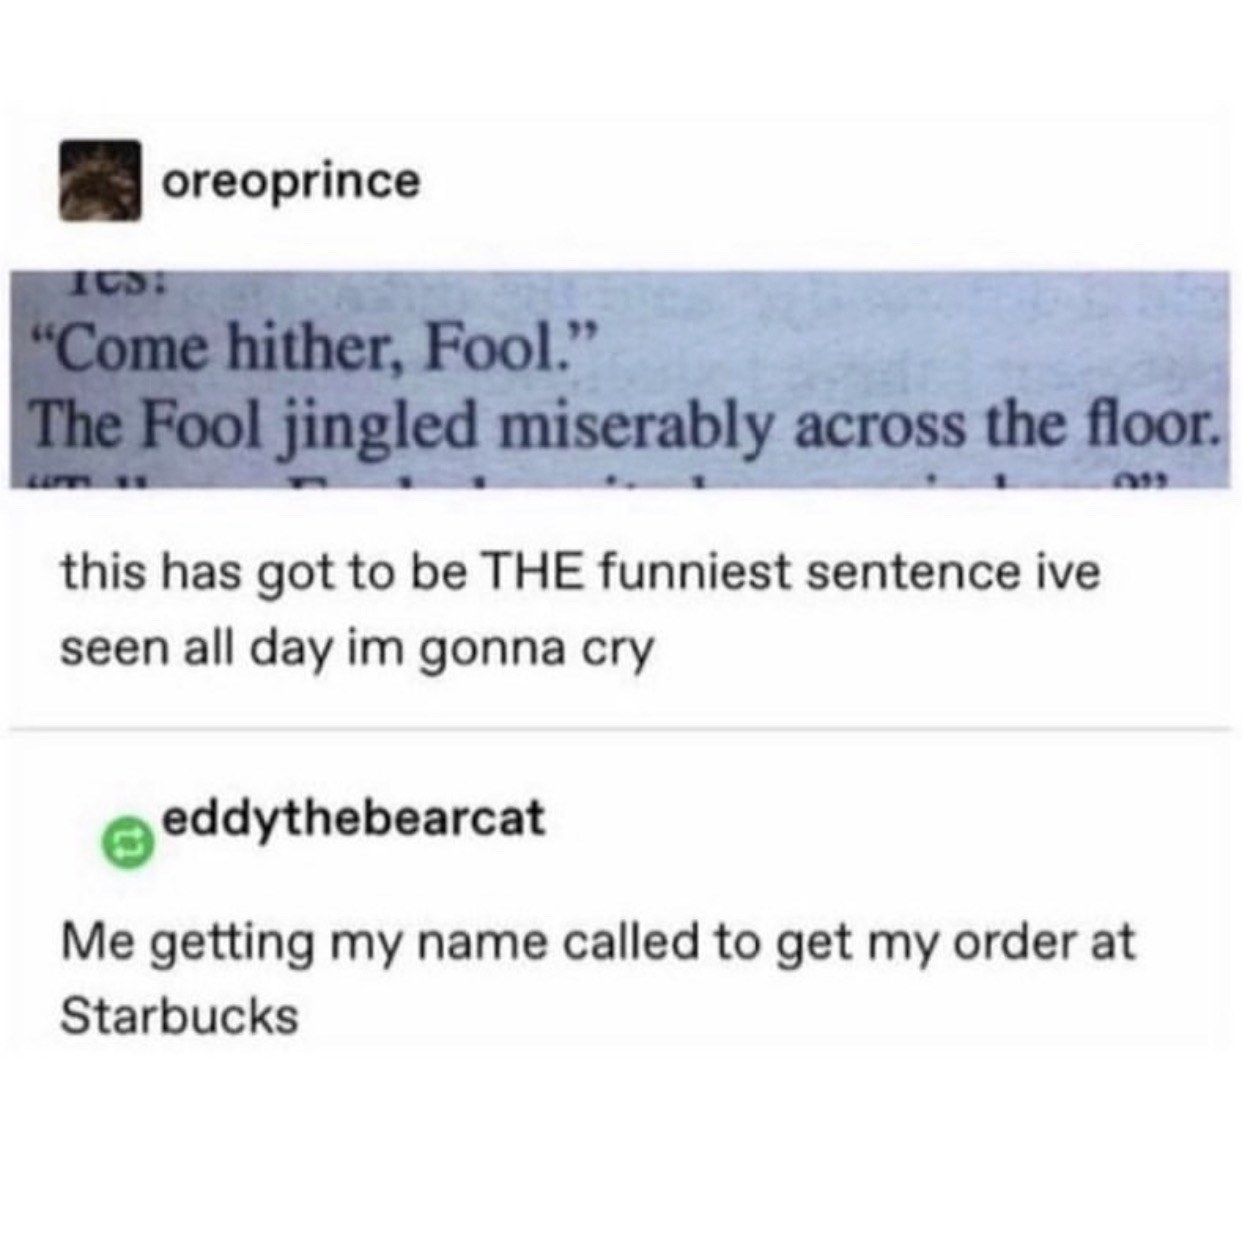 Person posts &quot;Come here, Fool&quot; and &quot;The Fool jingled miserably across the floor&quot; as the funniest sentence they&#x27;ve seen all day, and someone says &quot;Me getting my name called at Starbucks&quot;